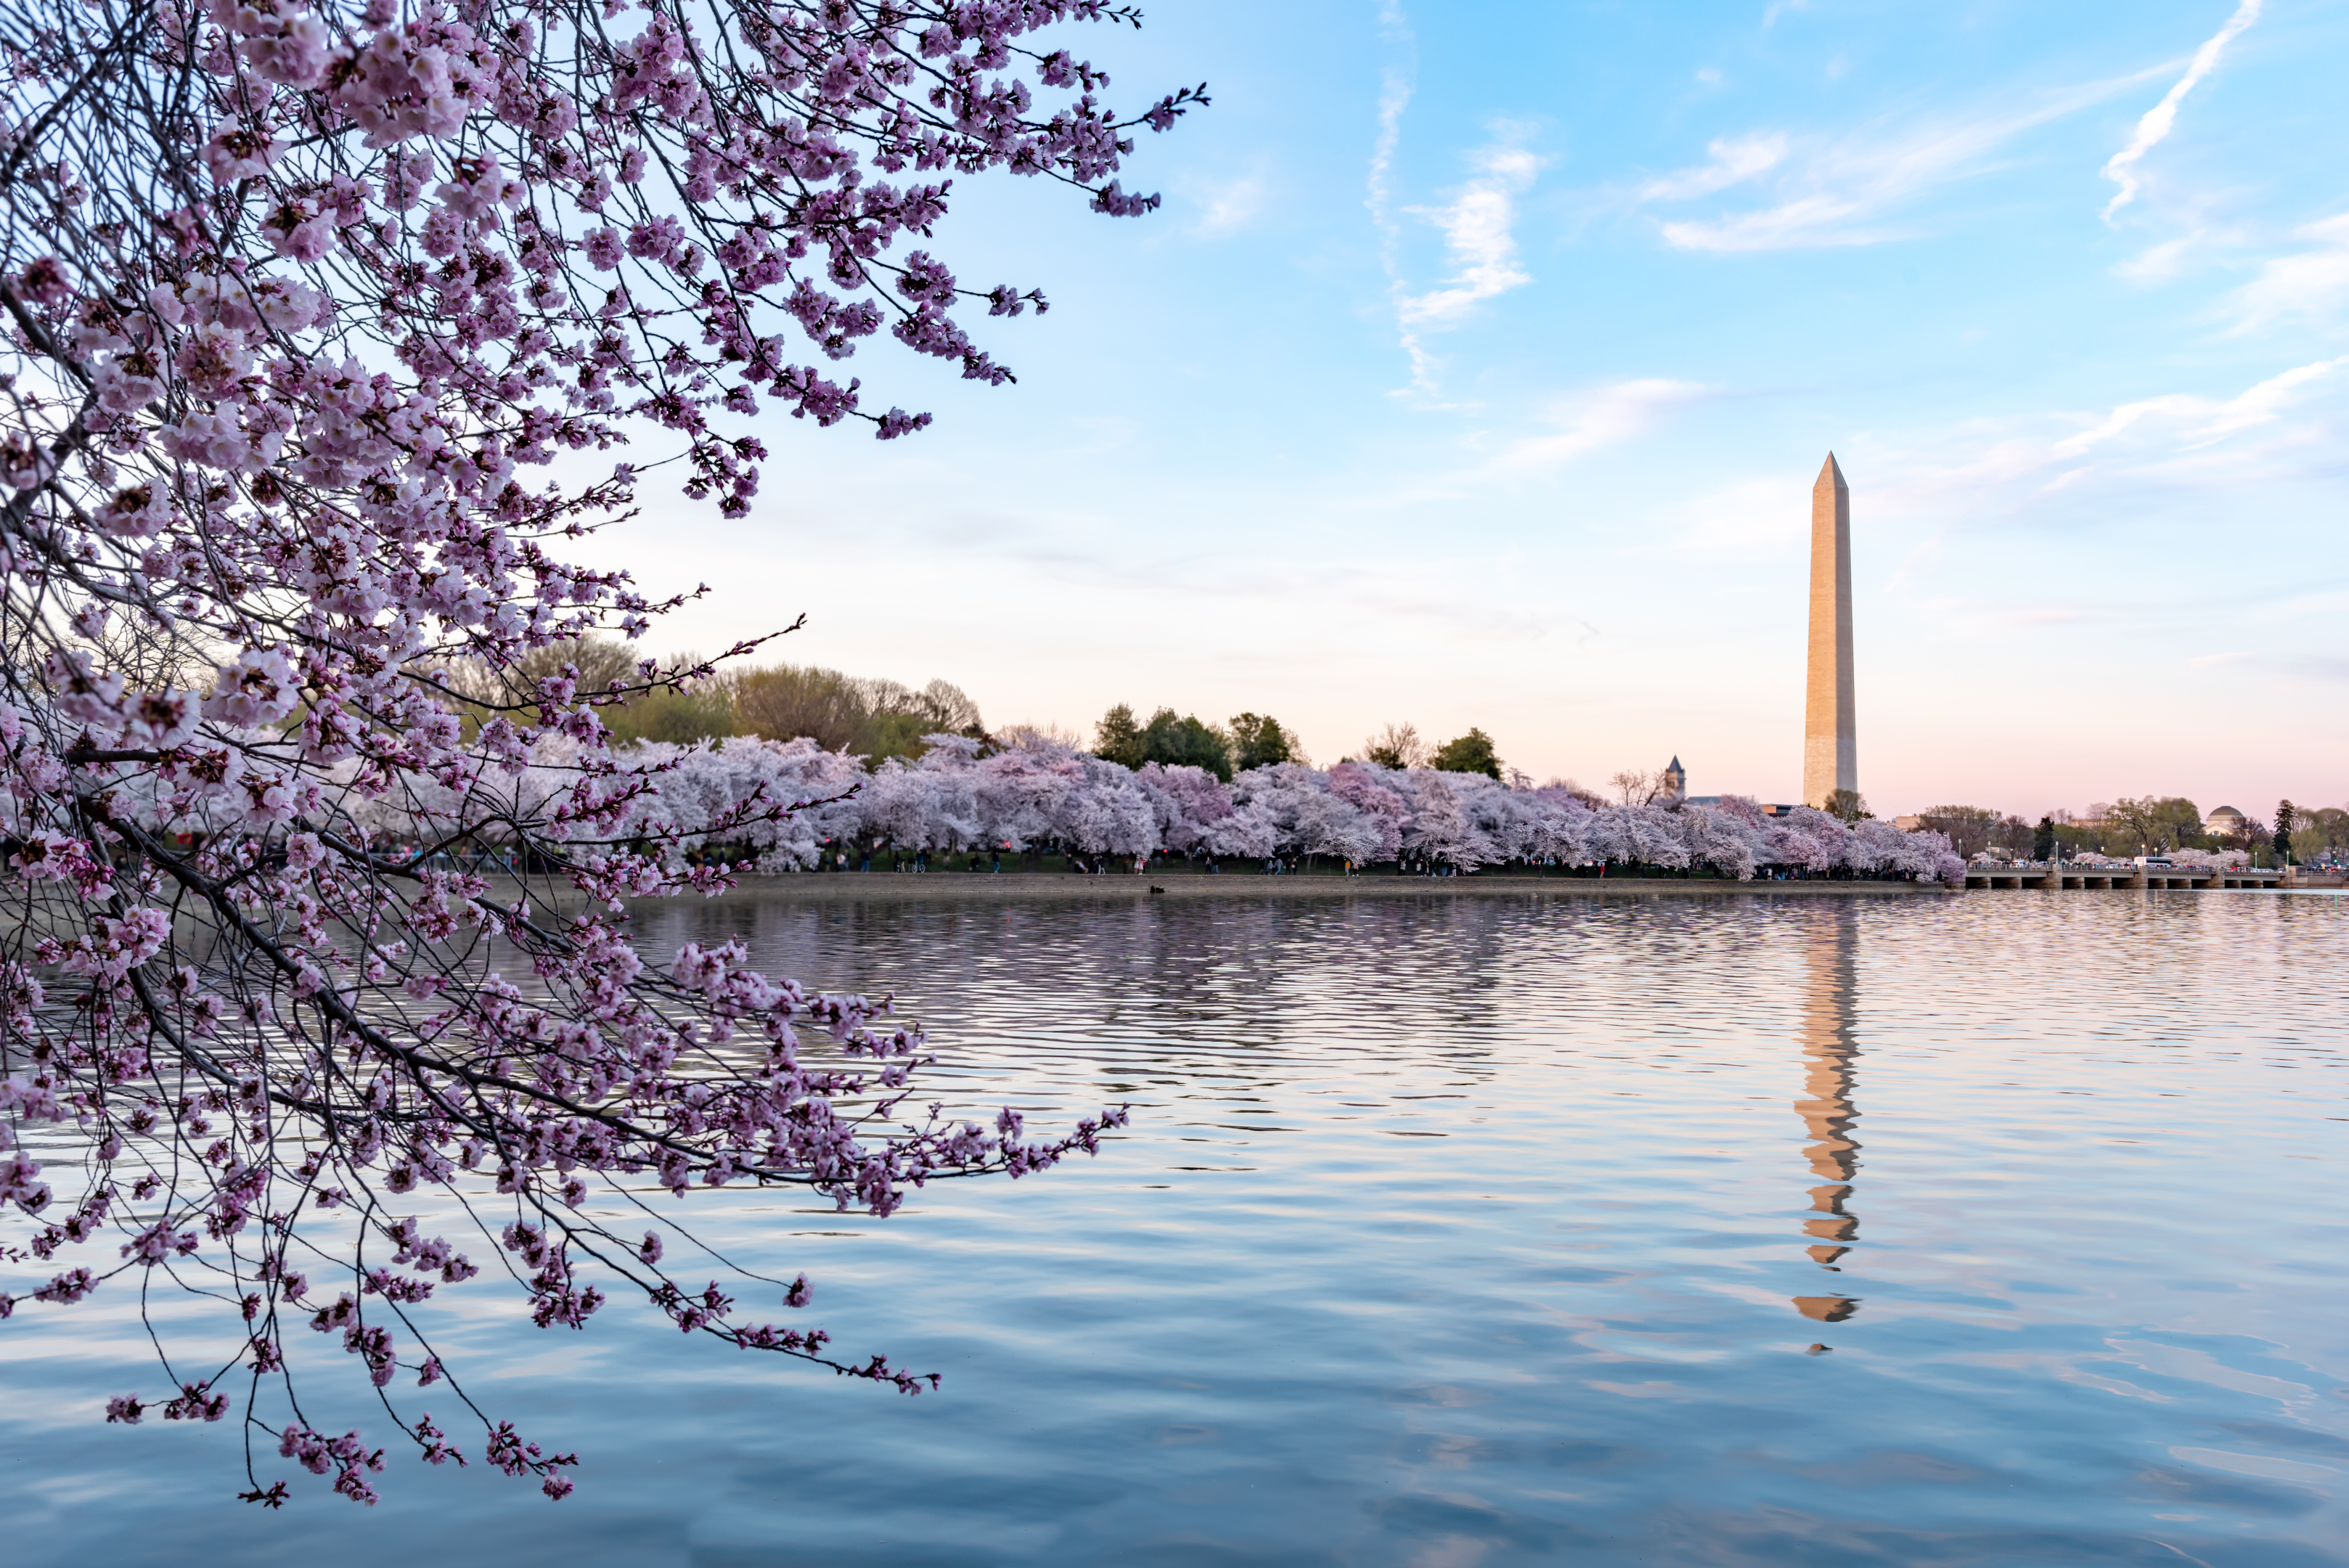 The Washington Monument during the National Cherry Blossom Festival